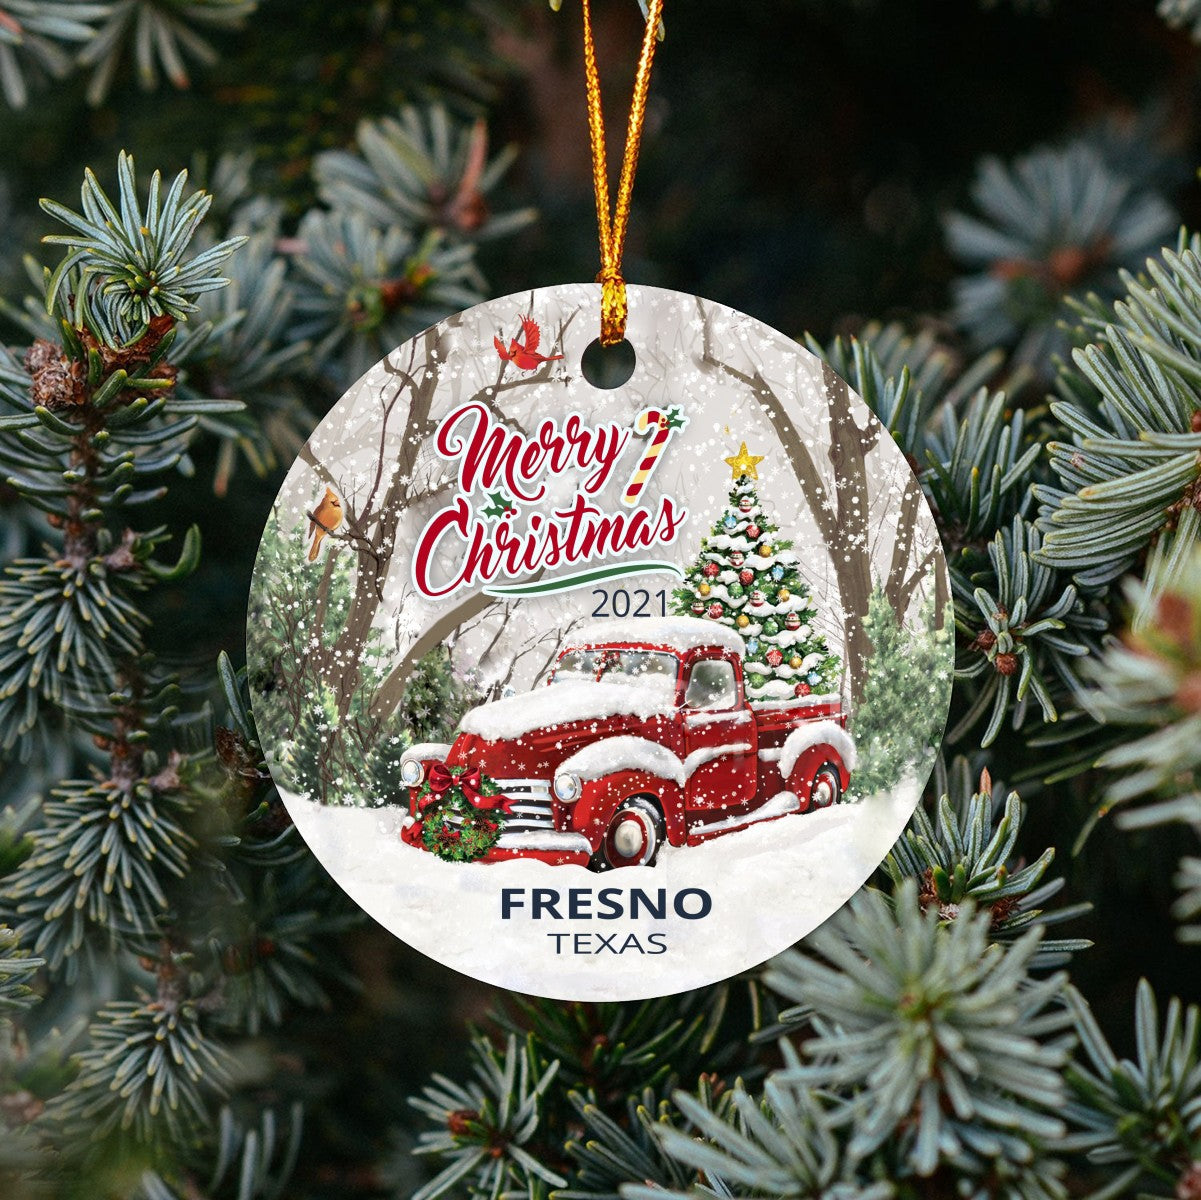 Christmas Tree Ornaments Fresno - Ornament With Name City, State Fresno Texas TX Ornament - Red Truck Xmas Ornaments 3'' Plastic Gift For Family, Friend And Housewarming